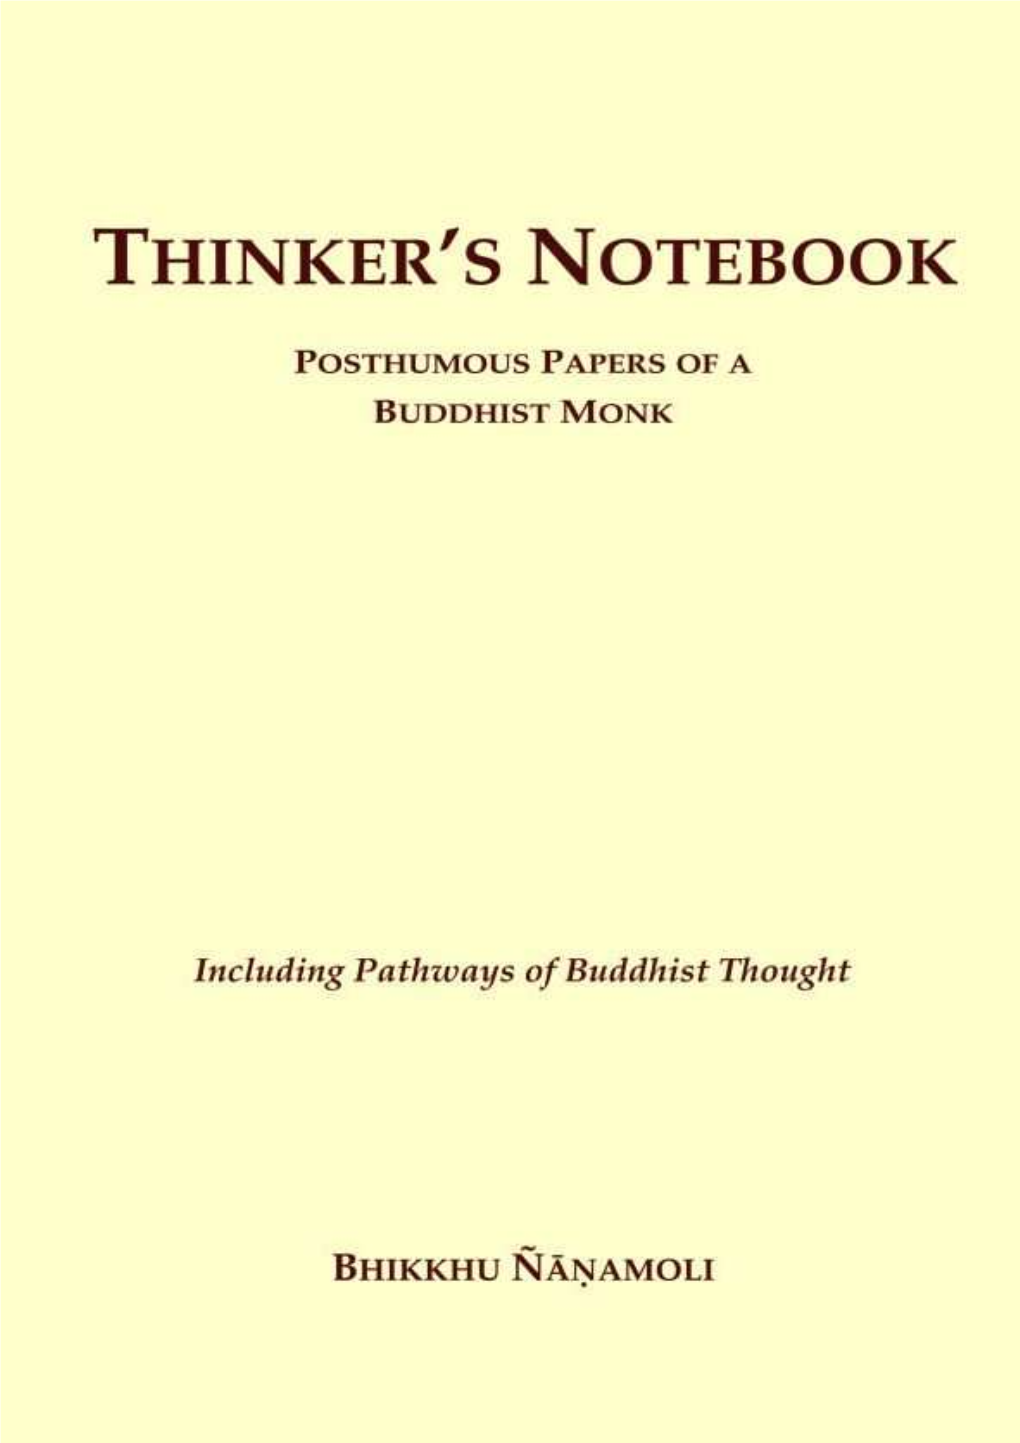 A Thinker's Notebook, They Were Collected from the Posthumous Papers of the Venerable Ñāṇamoli by Venerable Nyanaponika